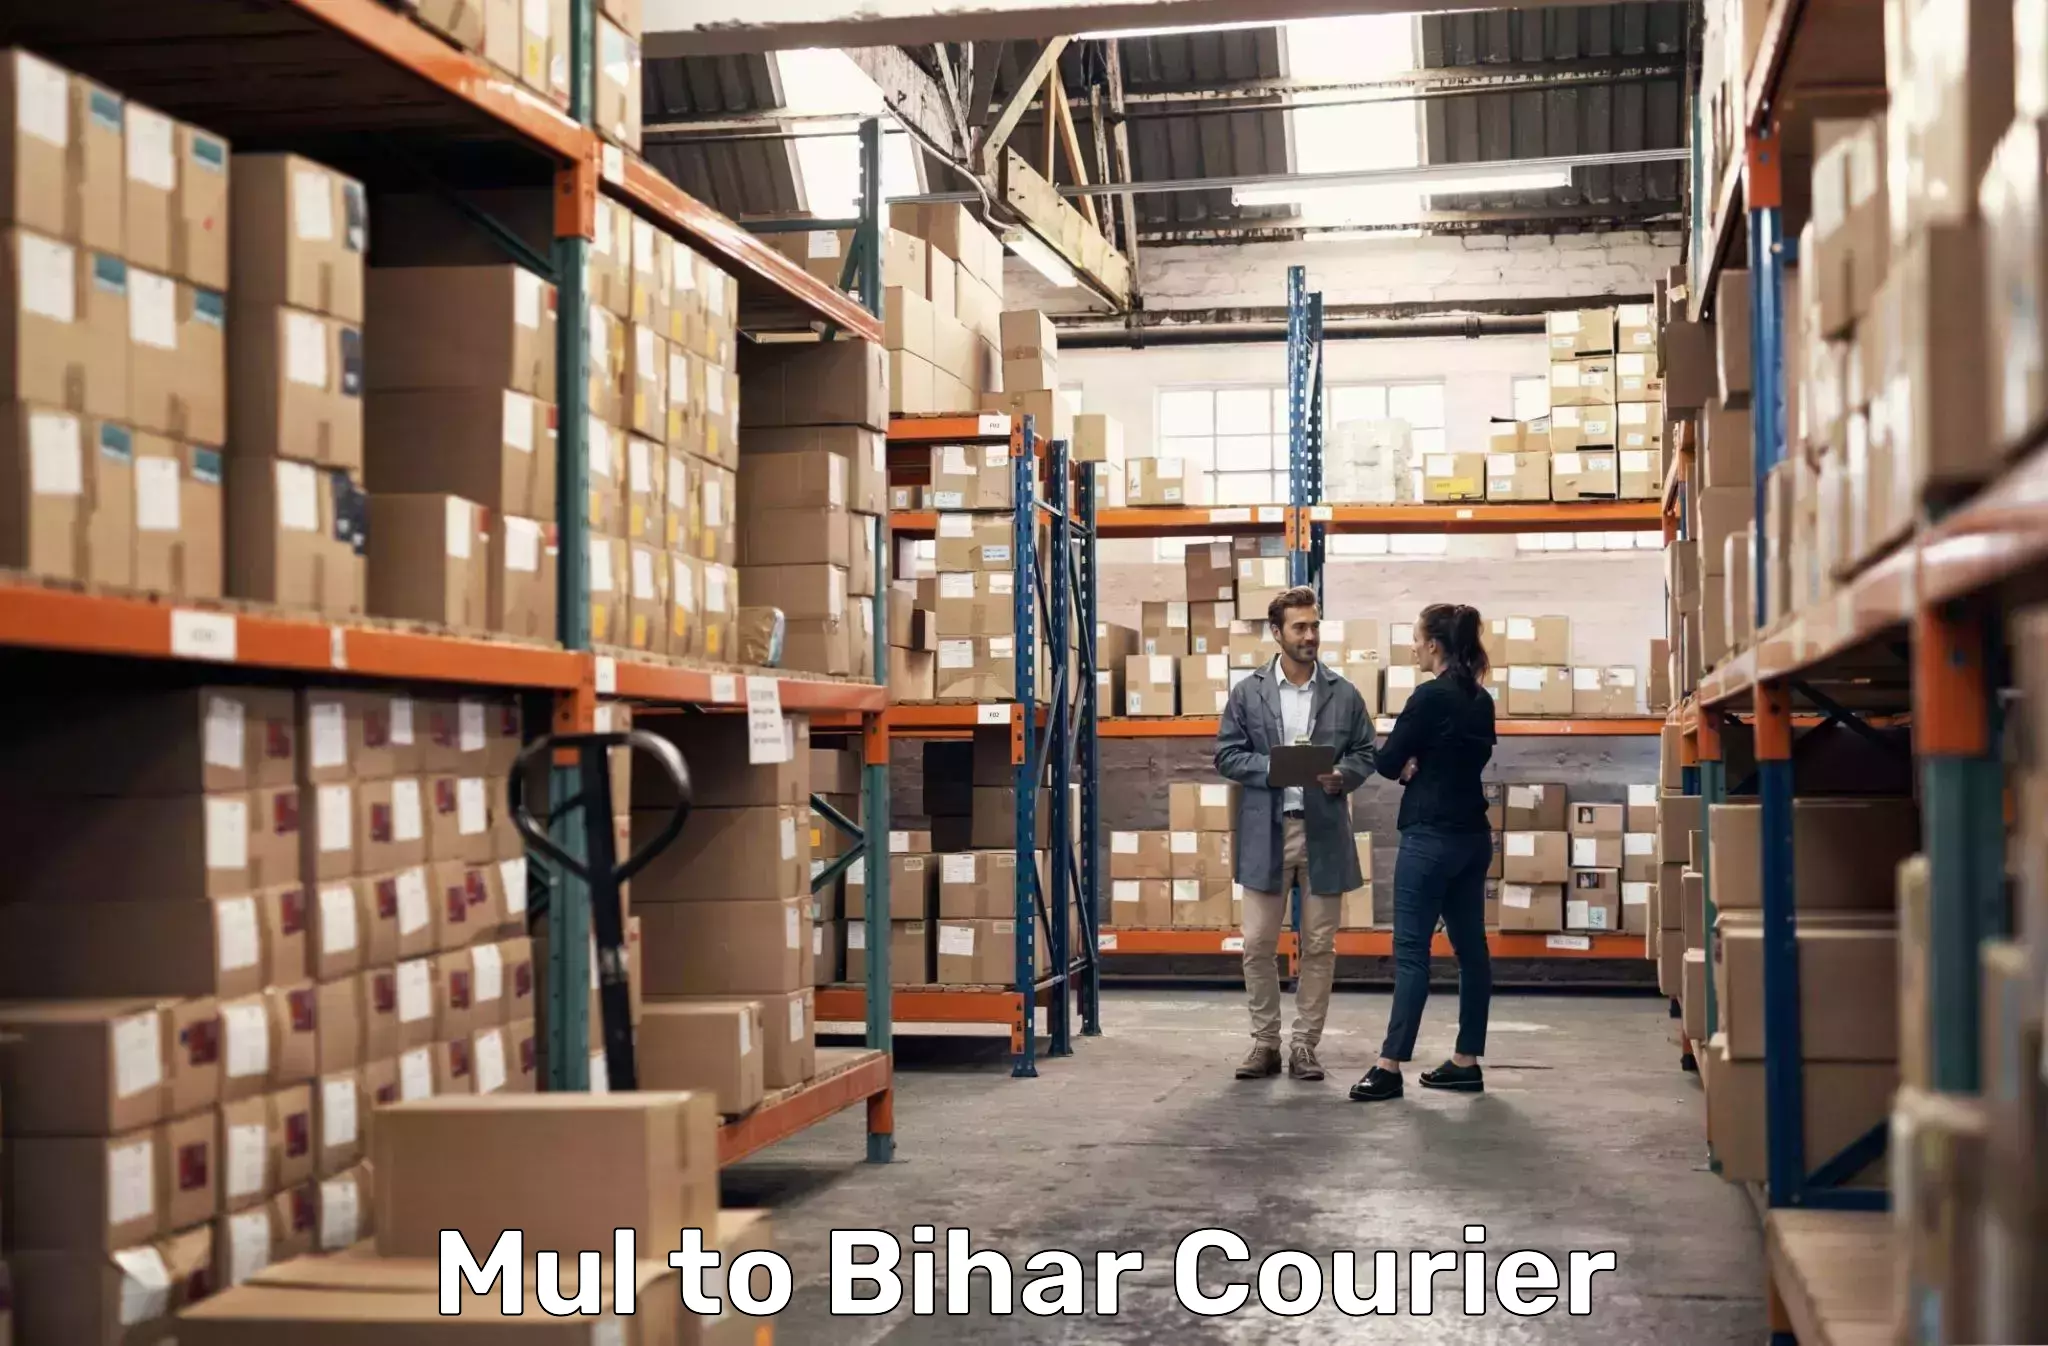 Express delivery network Mul to Bihar